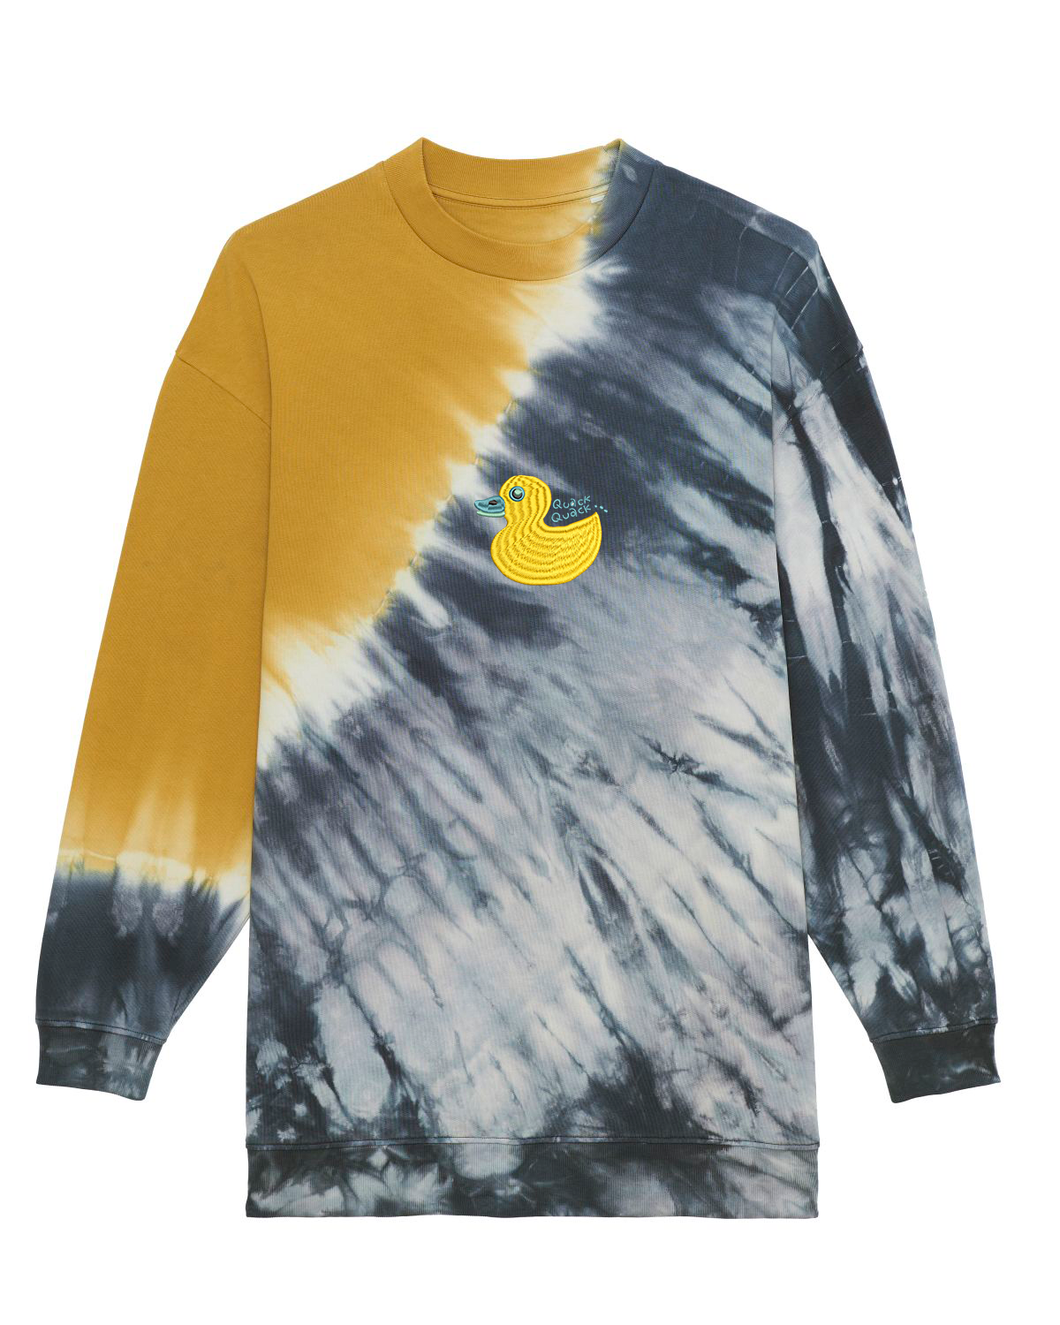 Quack, Quack 🦆 -  Embroidered UNISEX TIE AND DYE CREW NECK SWEATSHIRT-OUTLET🔴